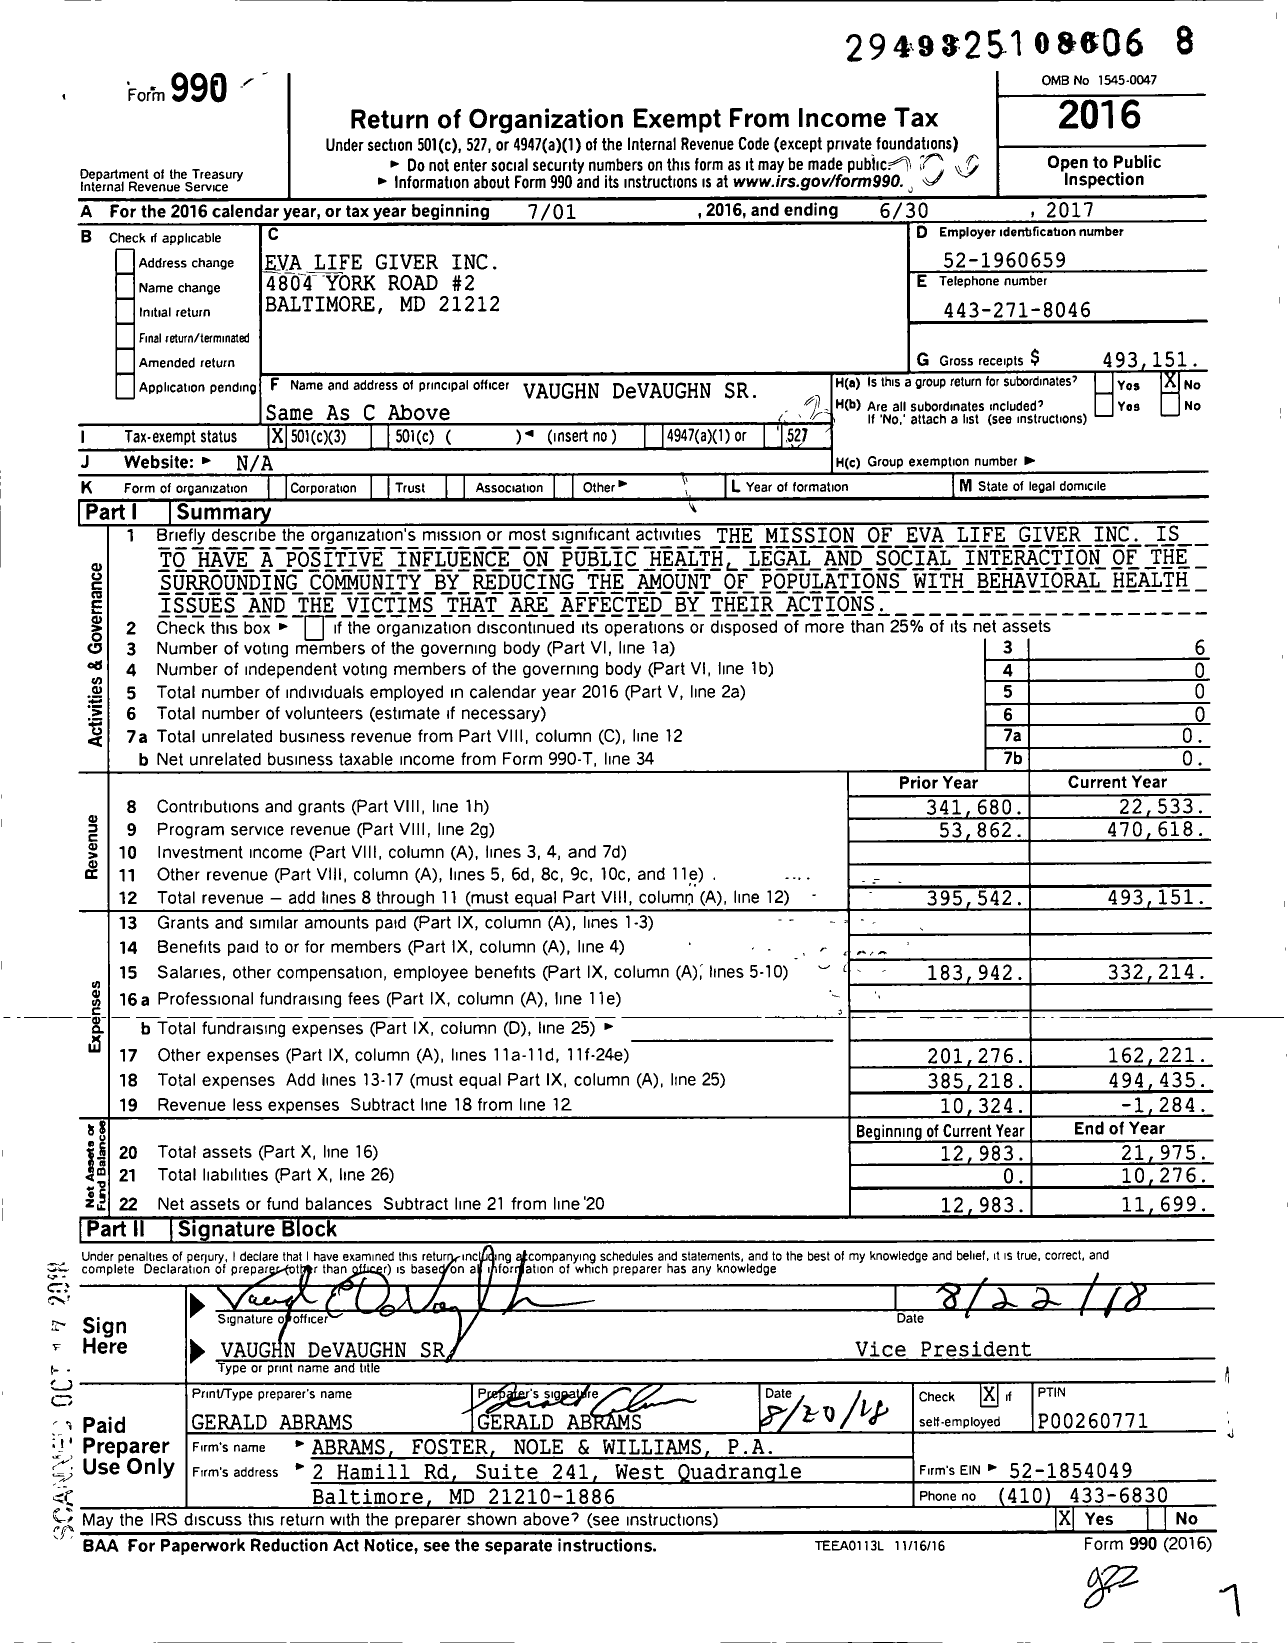 Image of first page of 2016 Form 990 for Eva Life Giver